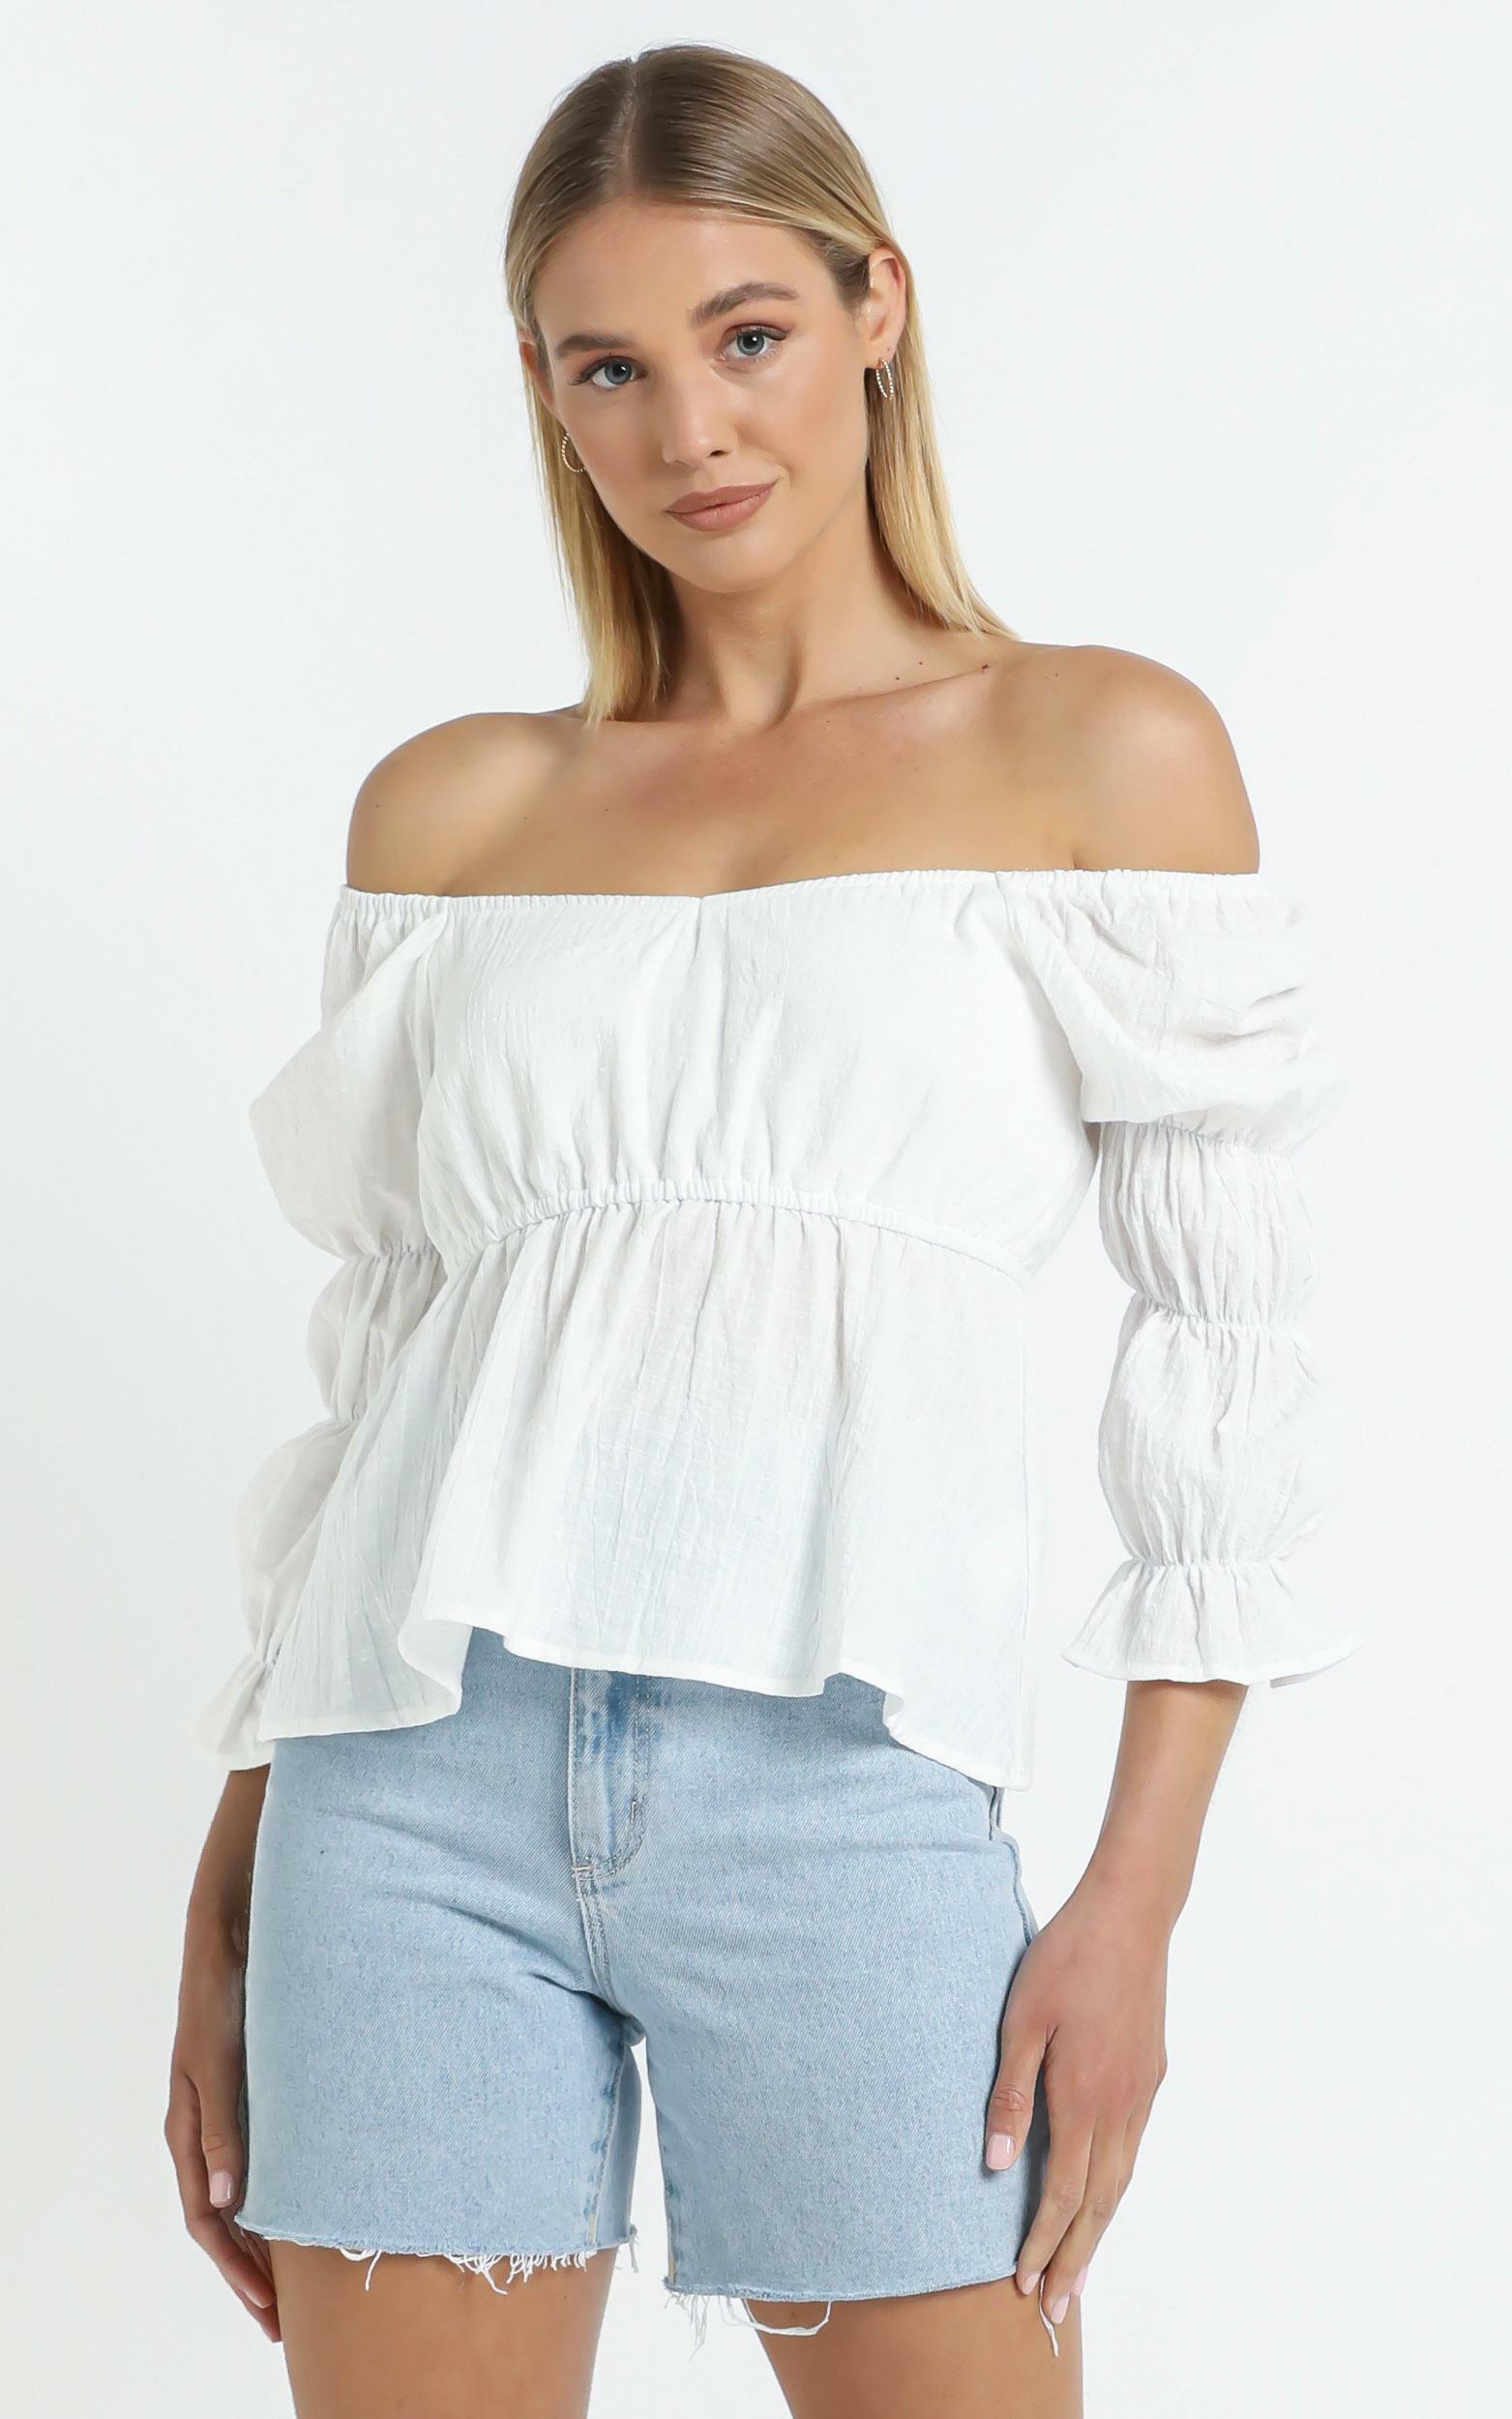 Mullins Top in White - 14 (XL), White, hi-res image number null